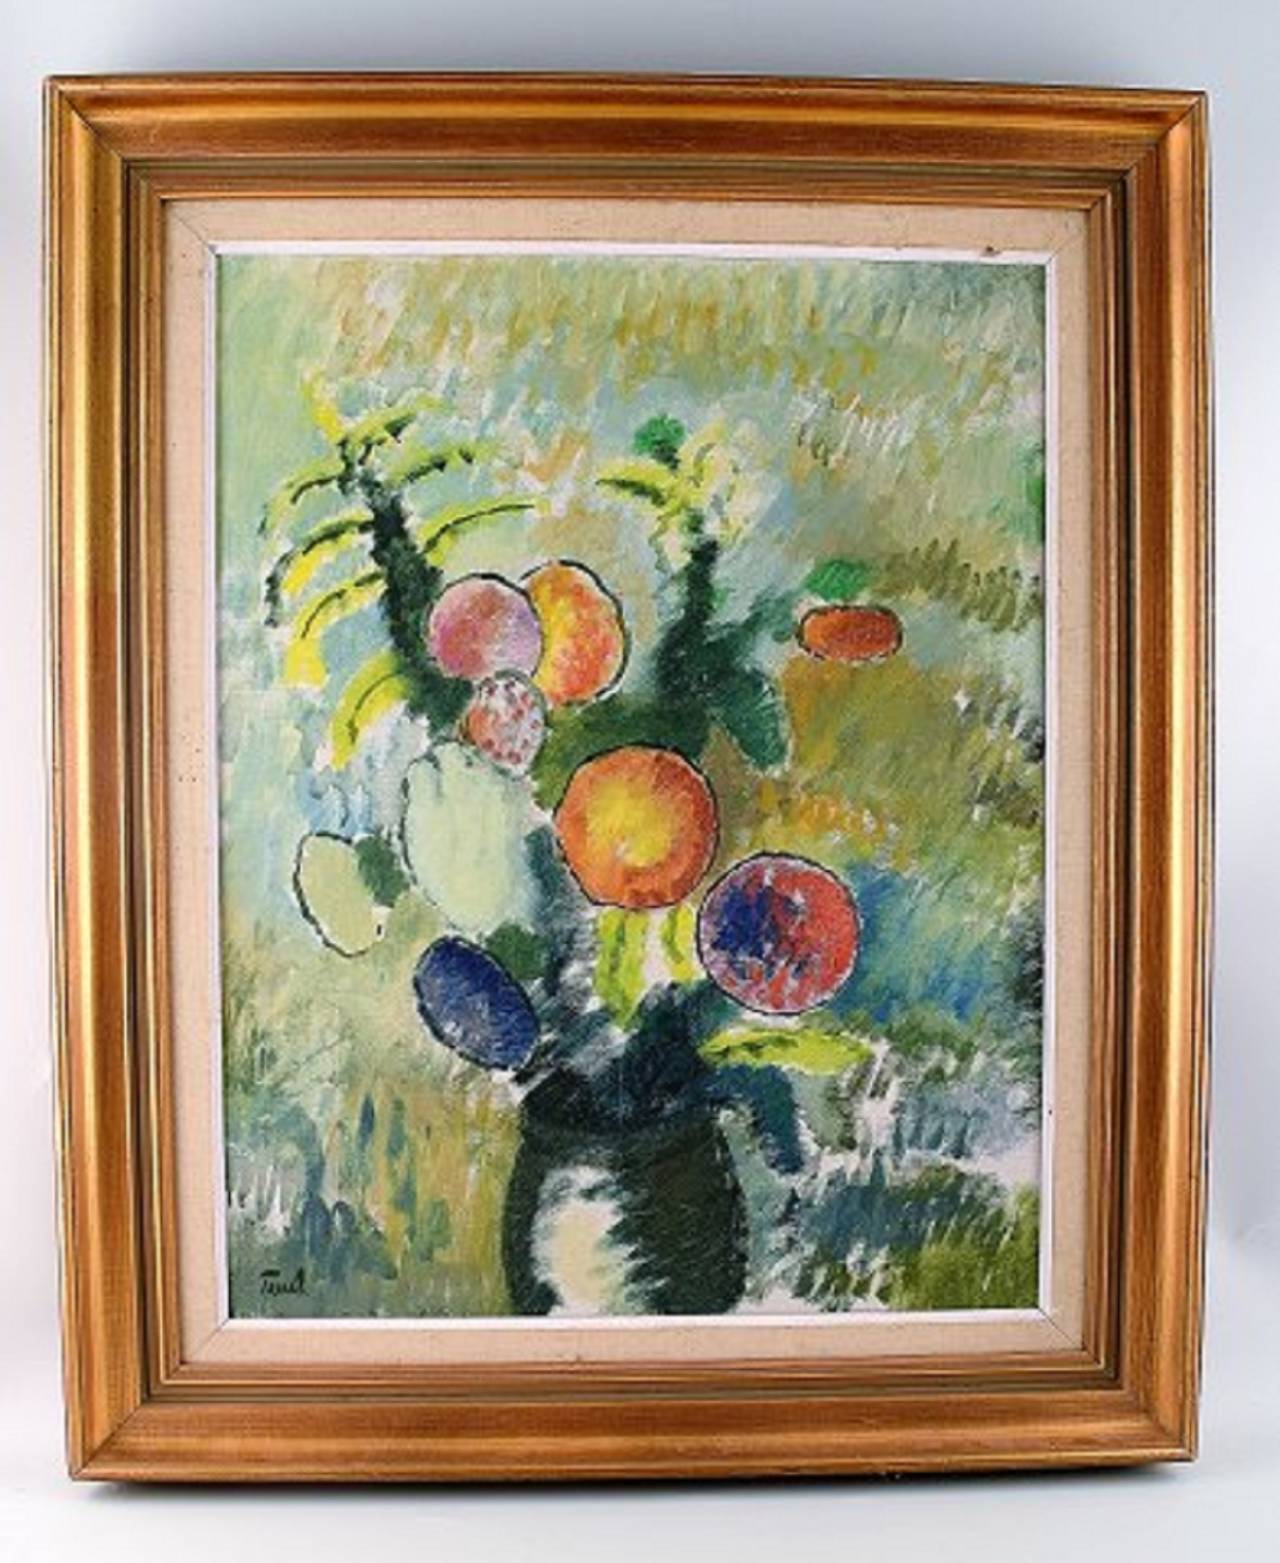 Still Life, oil on canvas.
In good condition.
Signed illegible.
Measures 44 x 56 cm.
The frame measures 7 cm.